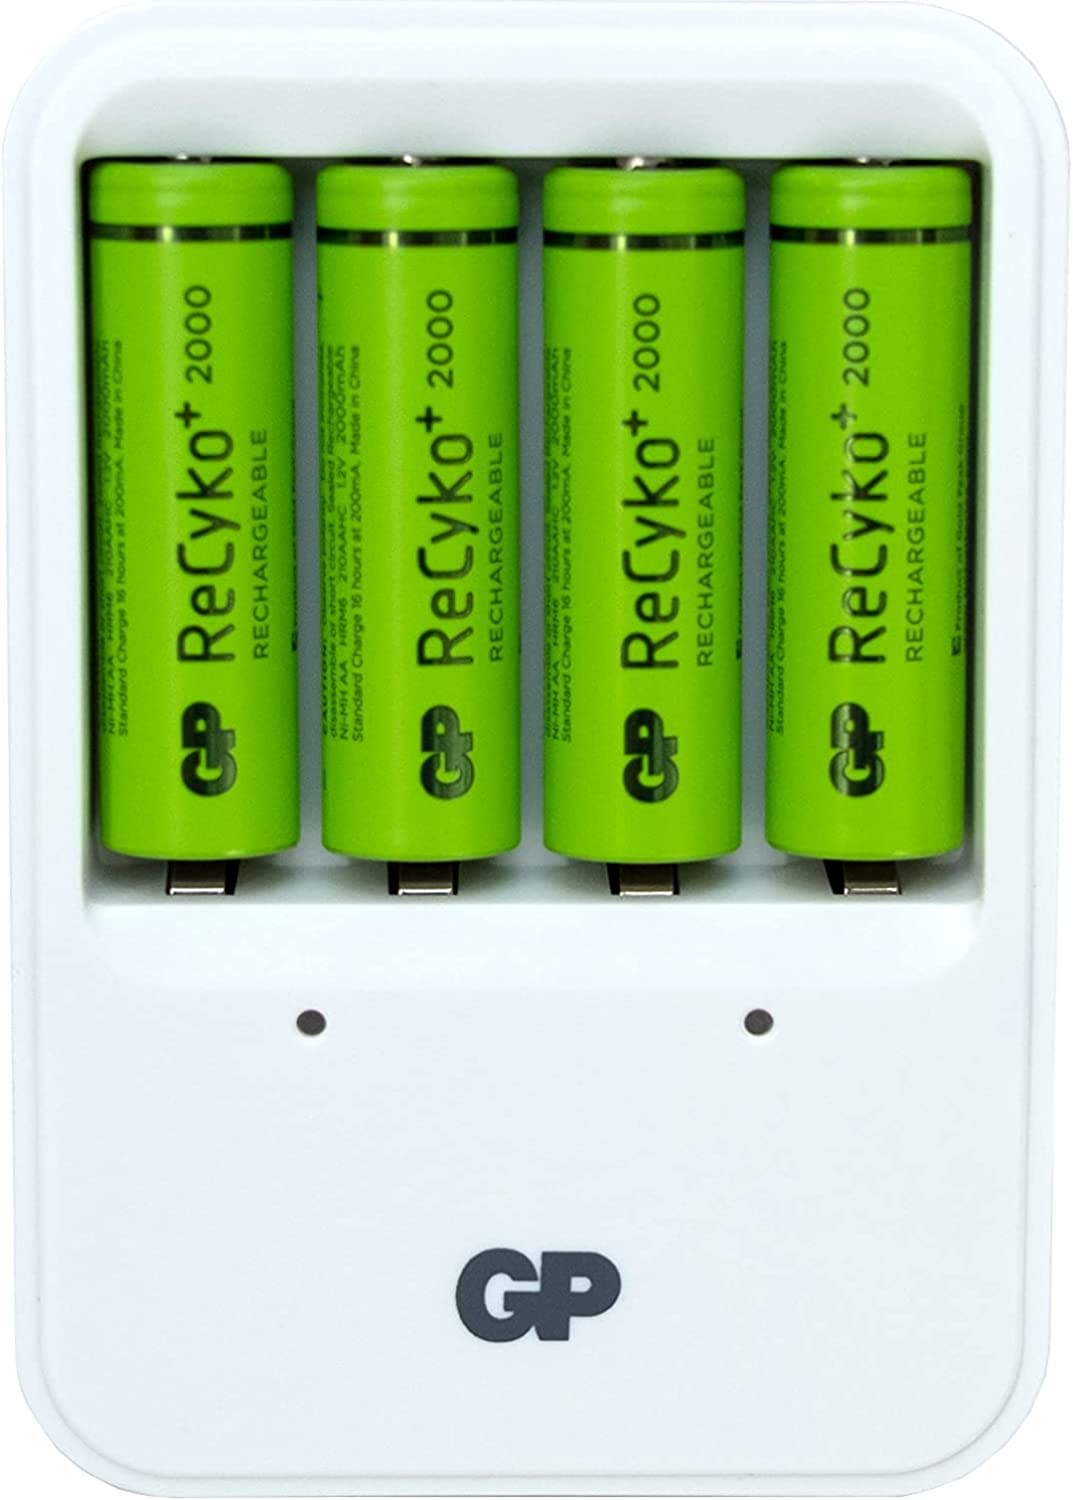 LDLC+ NiMH AA - 4 piles rechargeables AA (HR6) 2000 mAh - Pile & chargeur -  LDLC